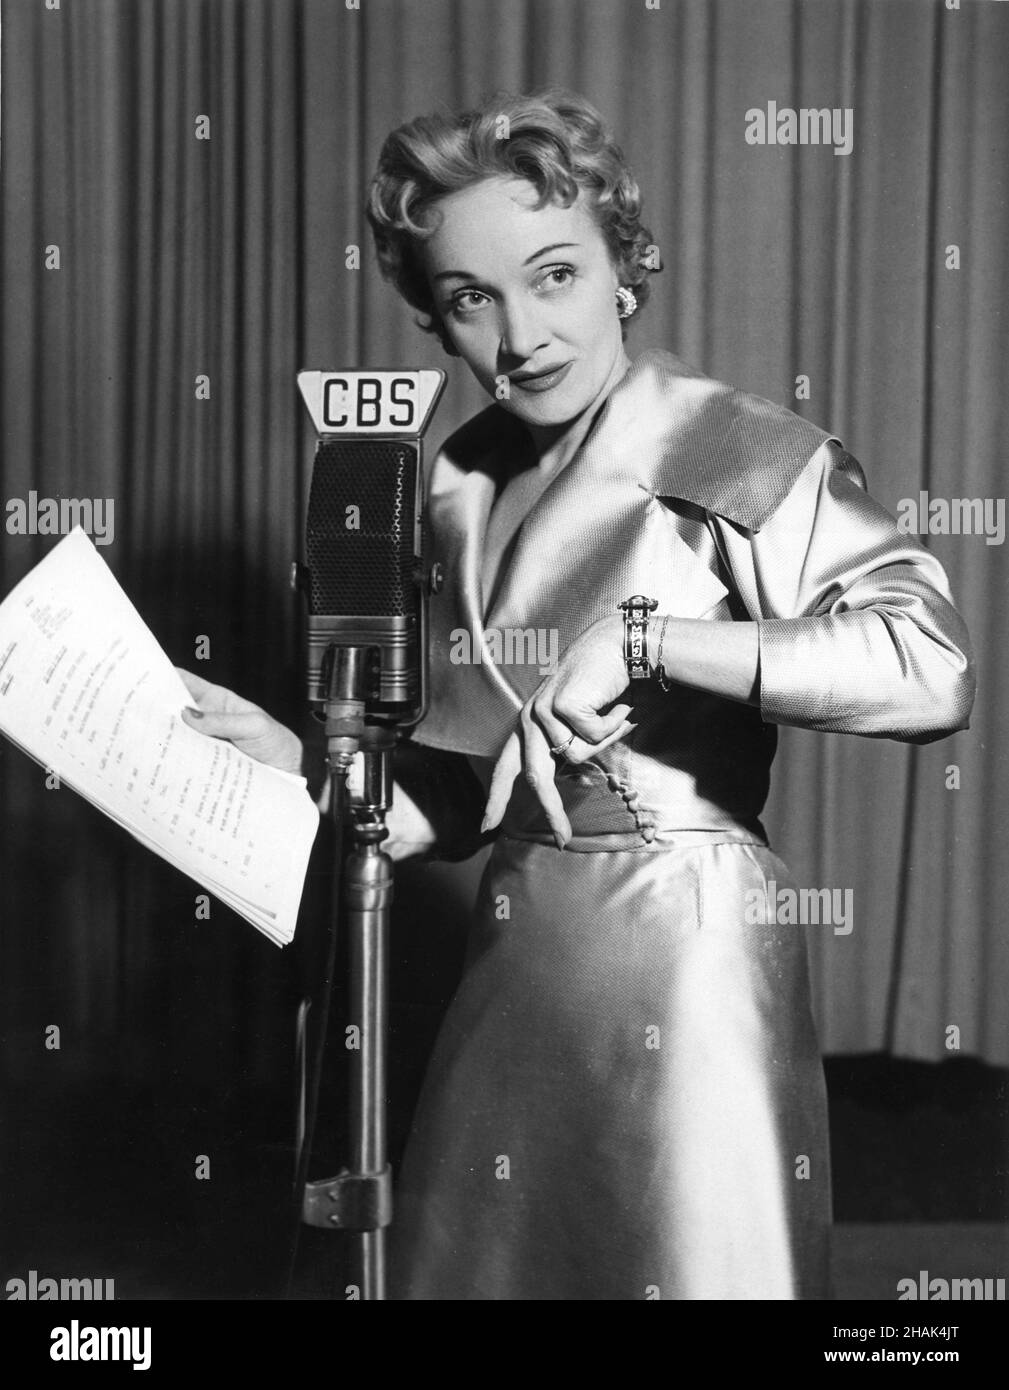 MARLENE DIETRICH unidentified appearance on CBS Radio in November 1953 publicity for Columbia Broadcasting System Stock Photo